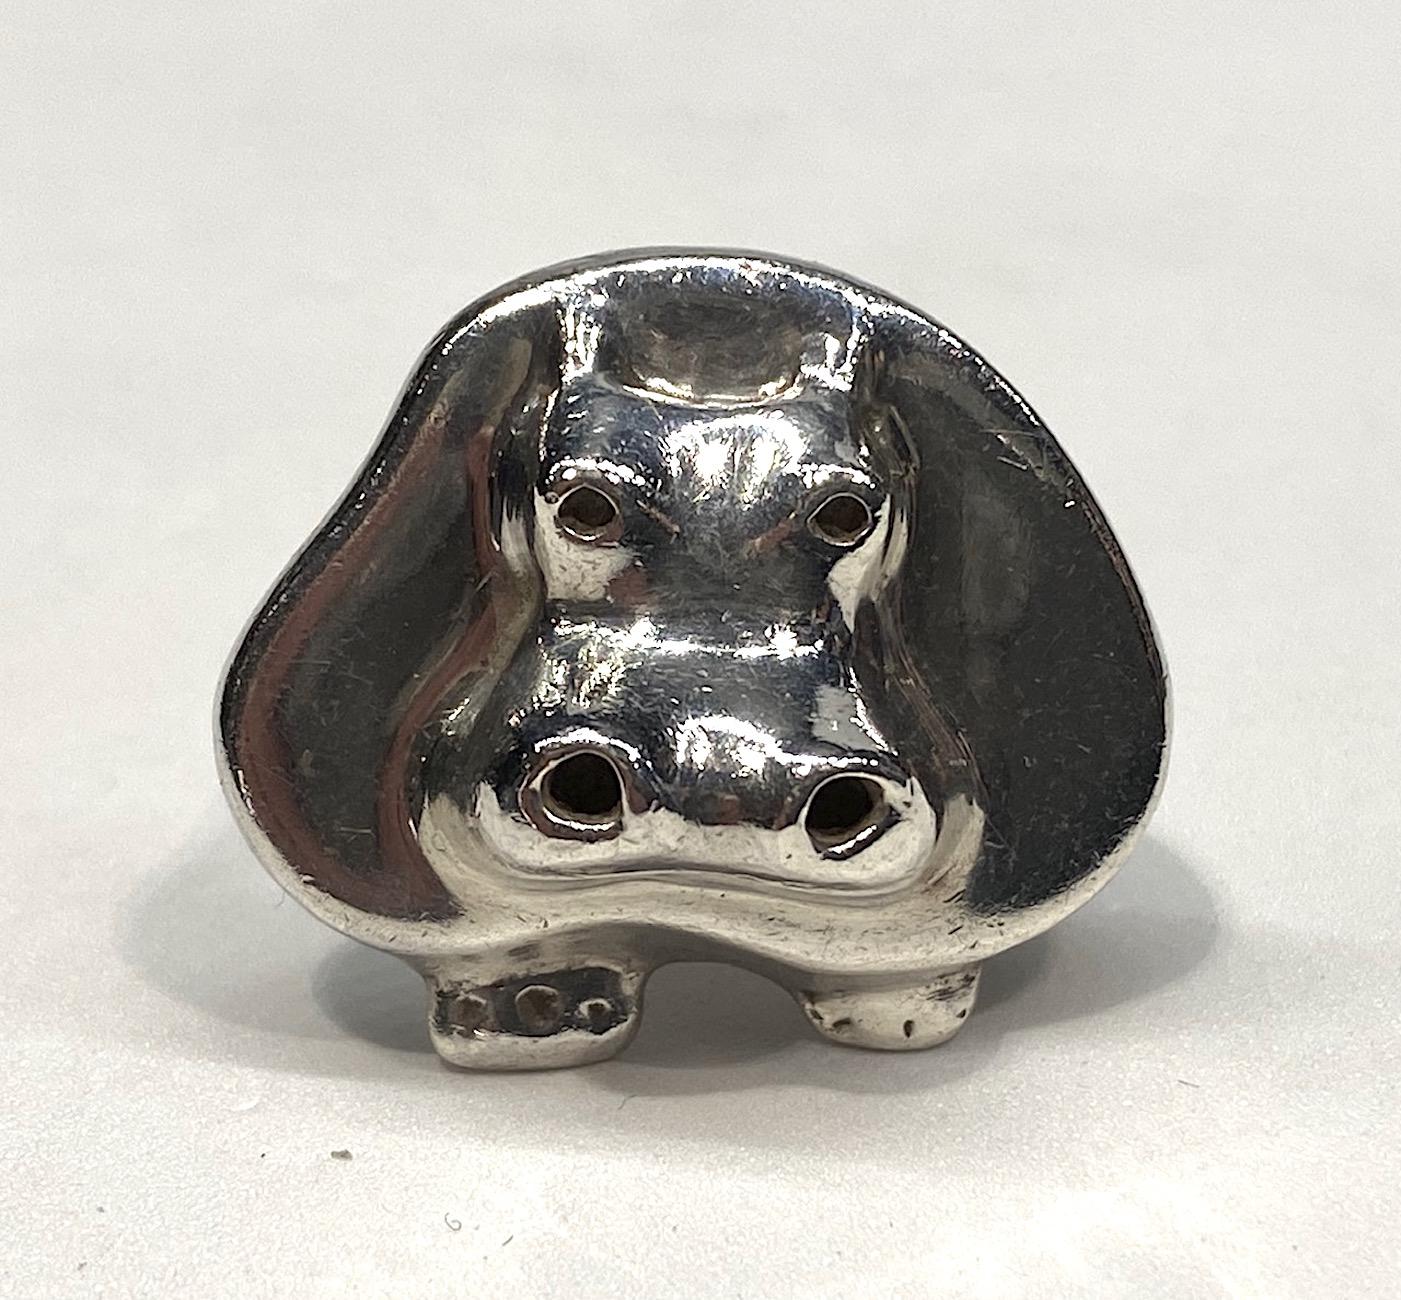 Modernist design sterling silver hippopotamus ring by New York City jewelry design team Jack Brusca and Joseph Dante in 1976. The cast sterling silver ring has an abstract front view of a hippopotamus mounted on top of a square ring. The face of the